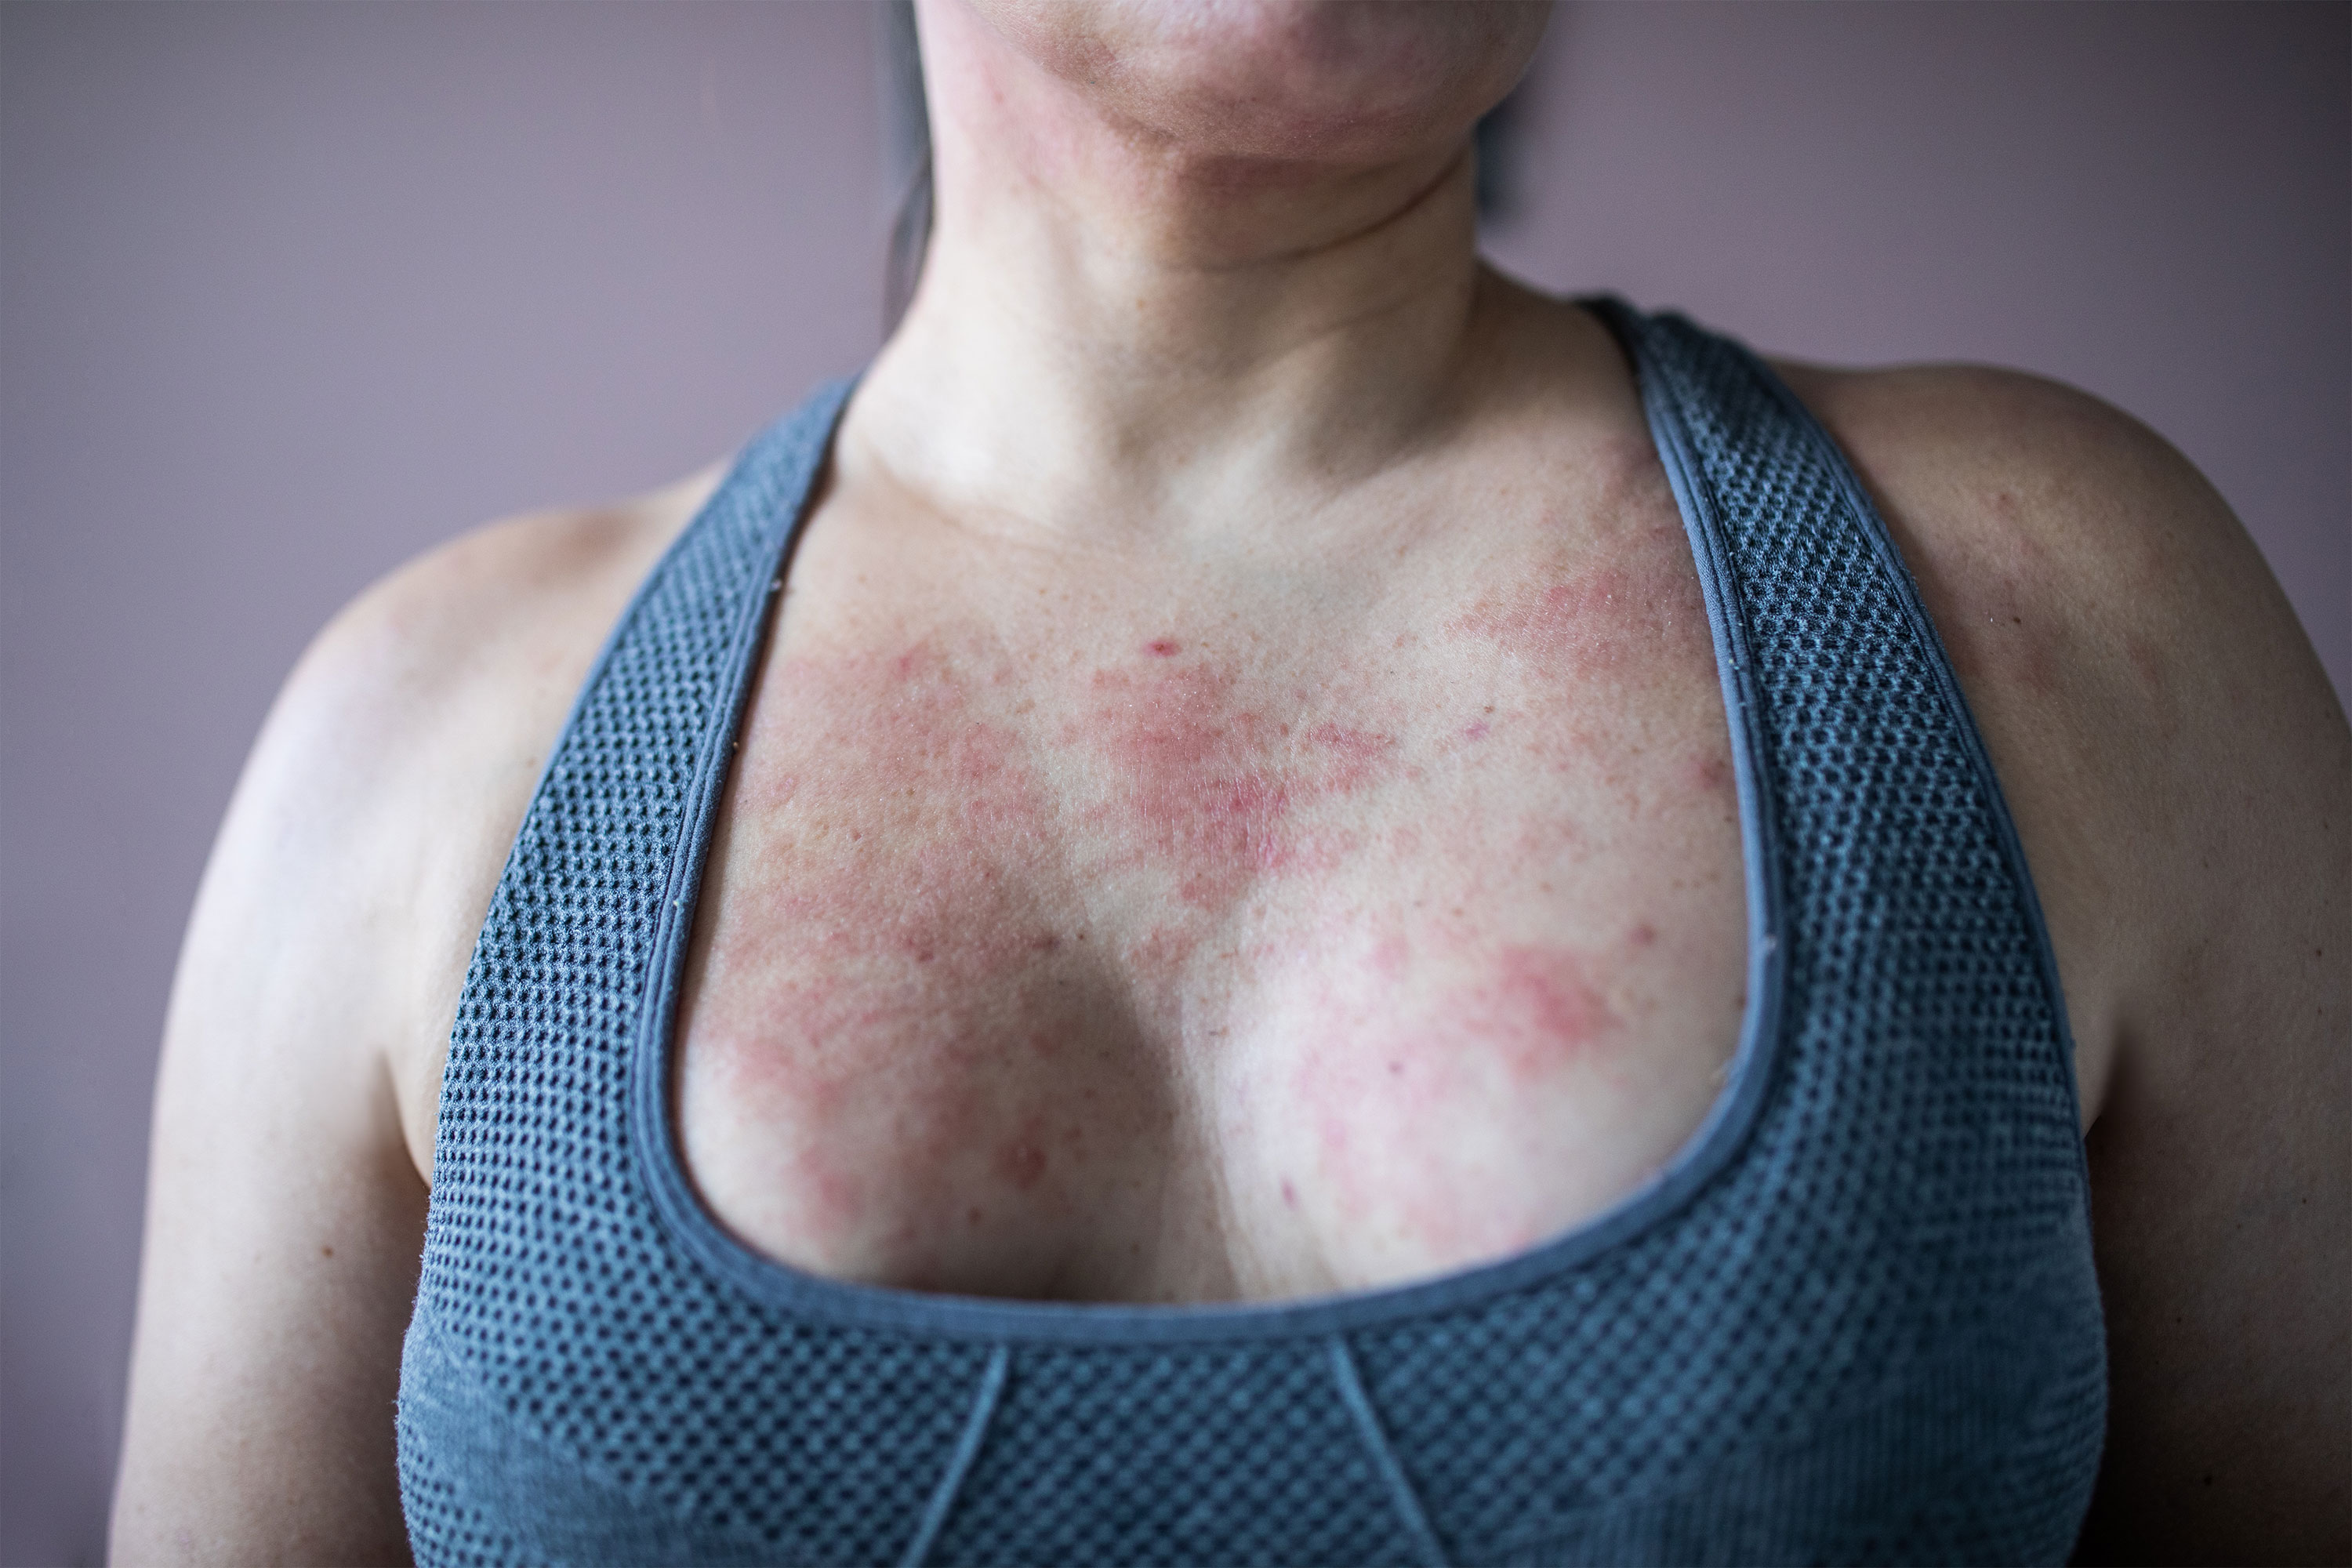 Breast Eczema: Symptoms, Causes, and Treatment